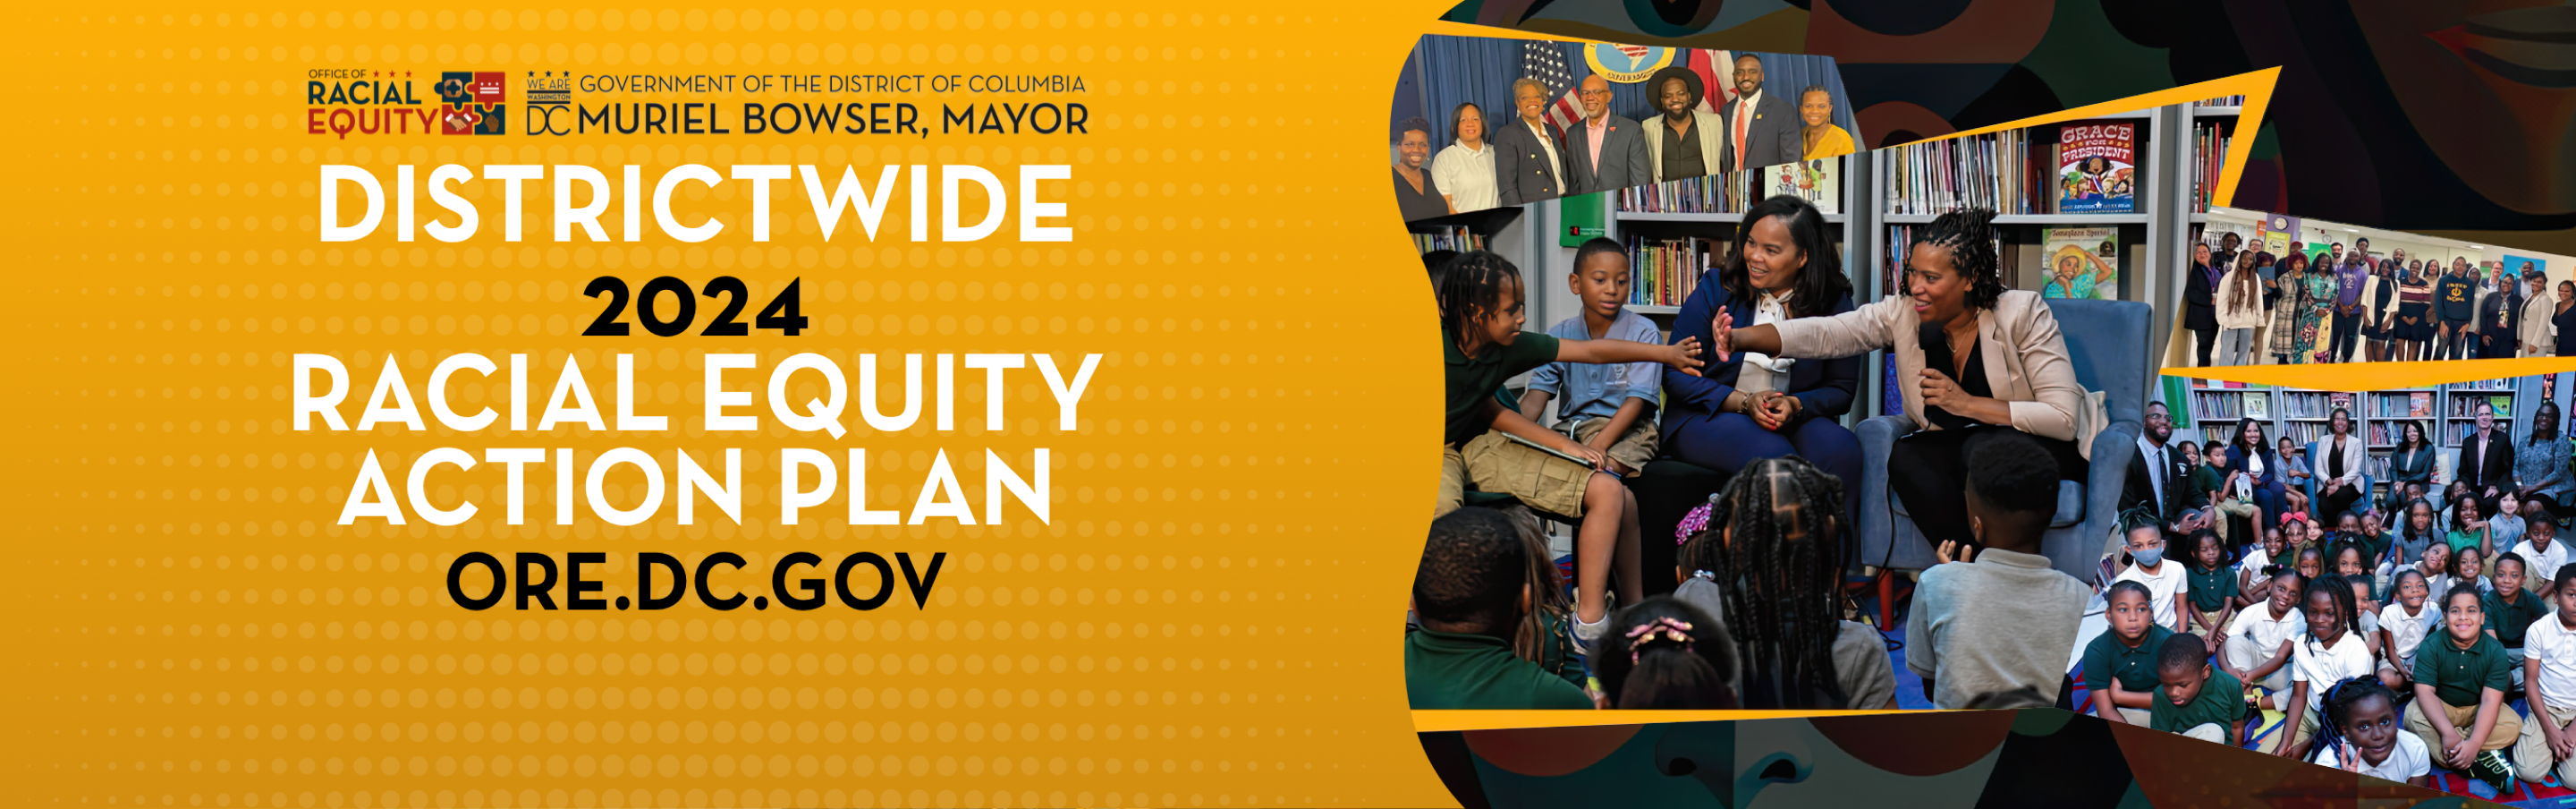 District Wide Racial Equity Action Plan